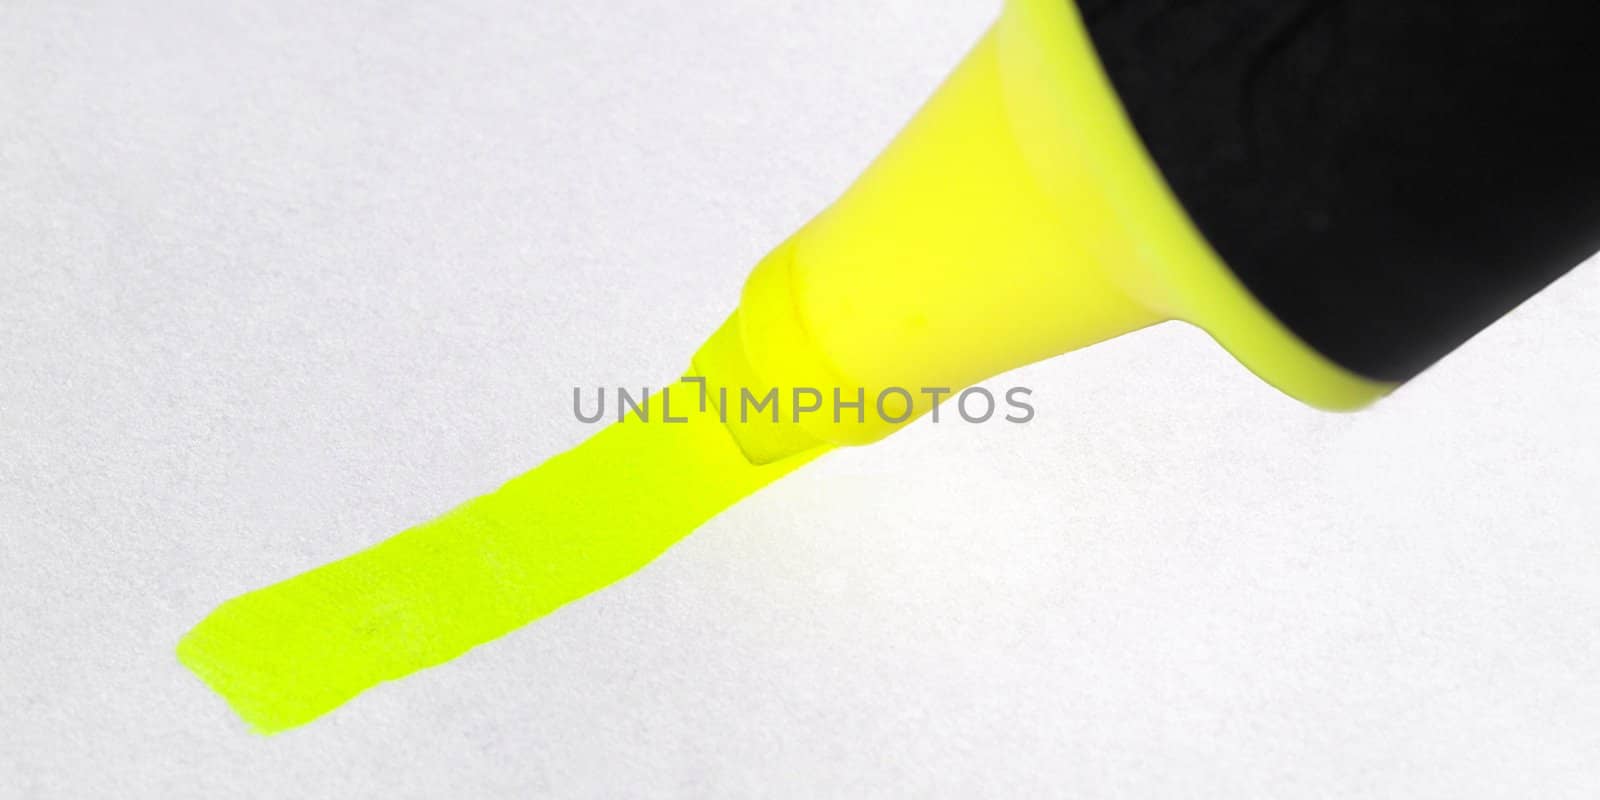 Highlighter marker by claudiodivizia